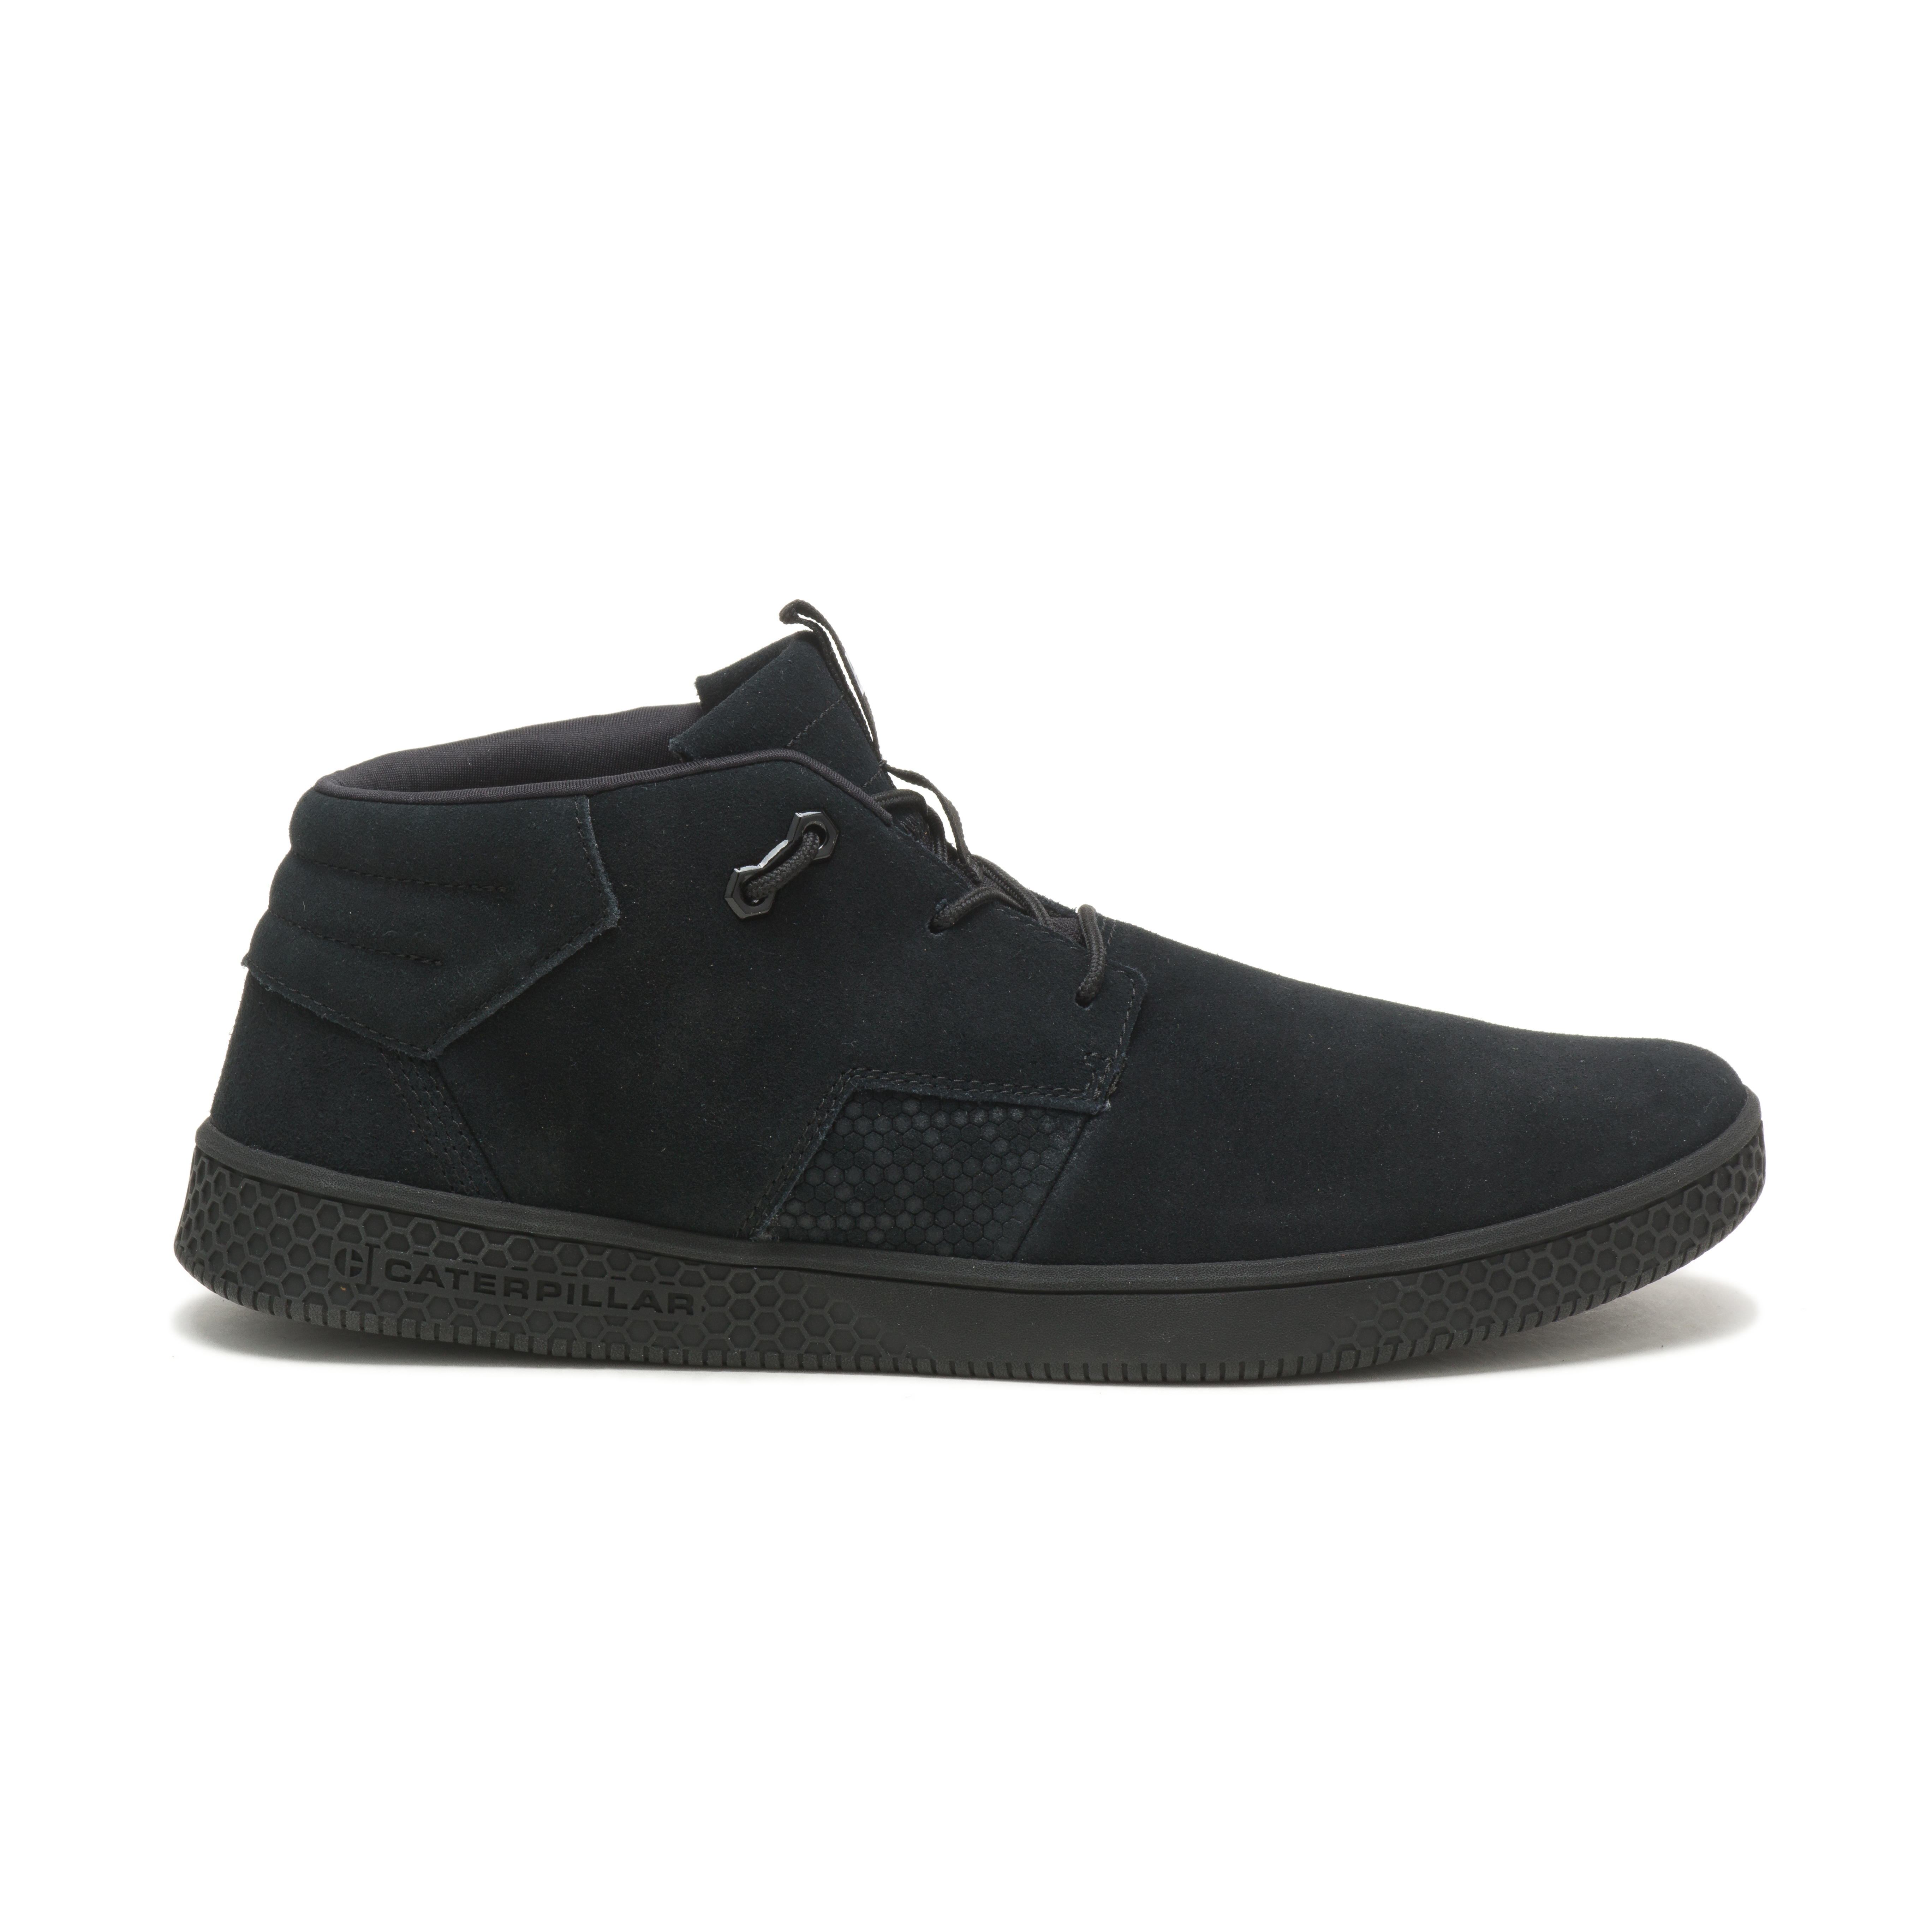 Caterpillar Casual Shoes Online UAE - Caterpillar Pause Mid Mens - Black TLYVCS814